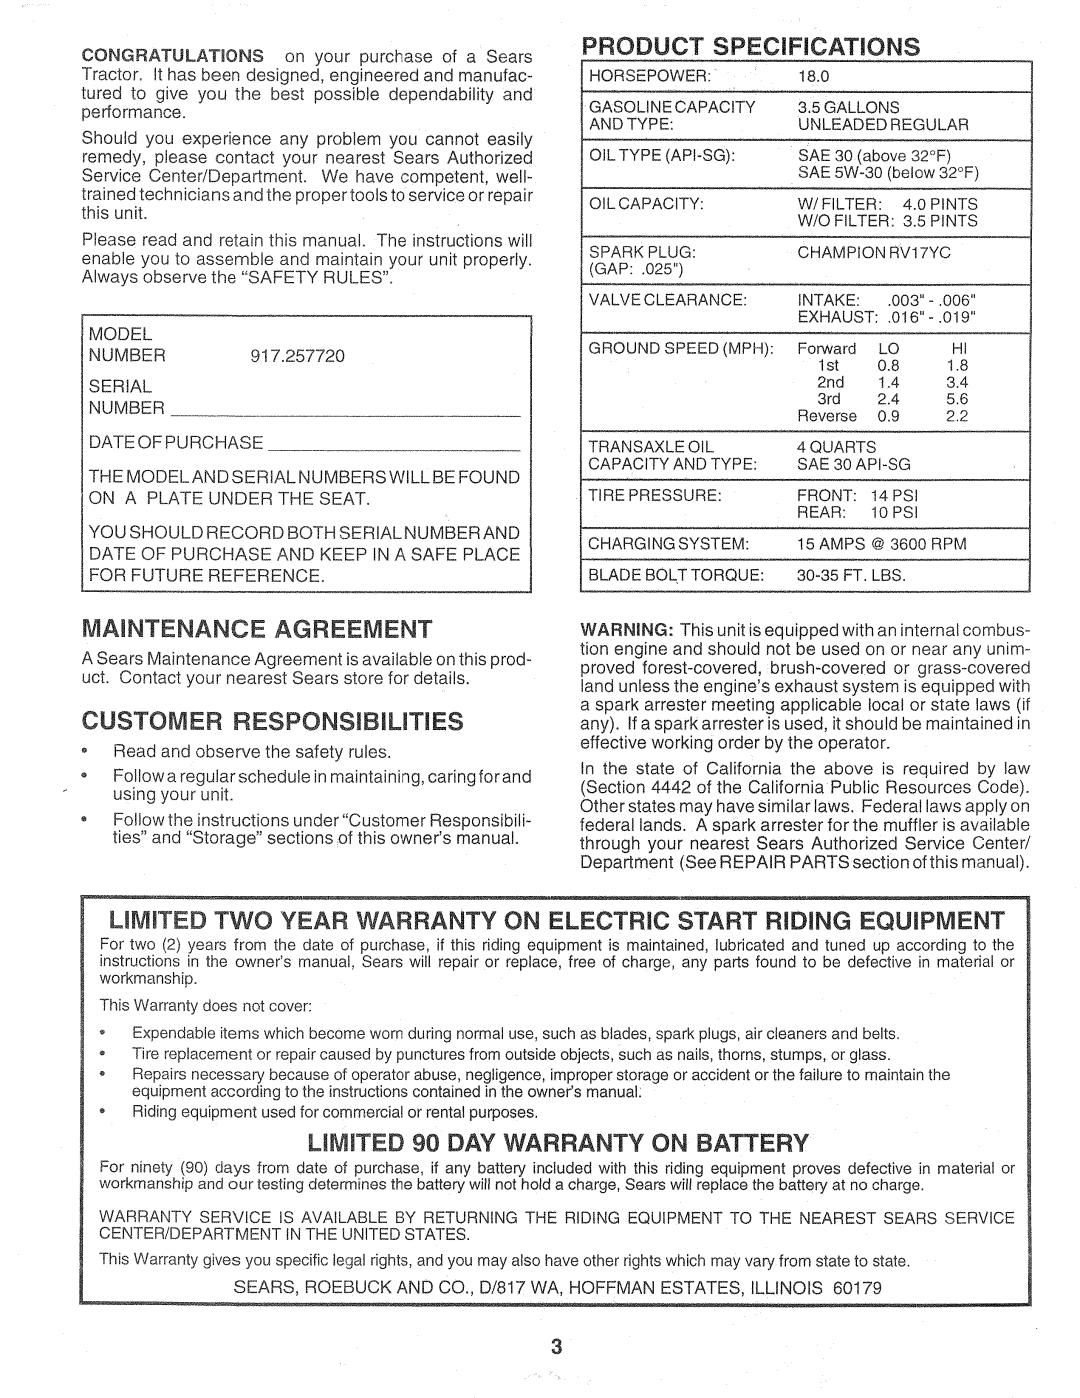 Sears 917.257720 owner manual Maintenance Agreement, CUSTOMER RESPONSNBILmTIES, Product Specifications 